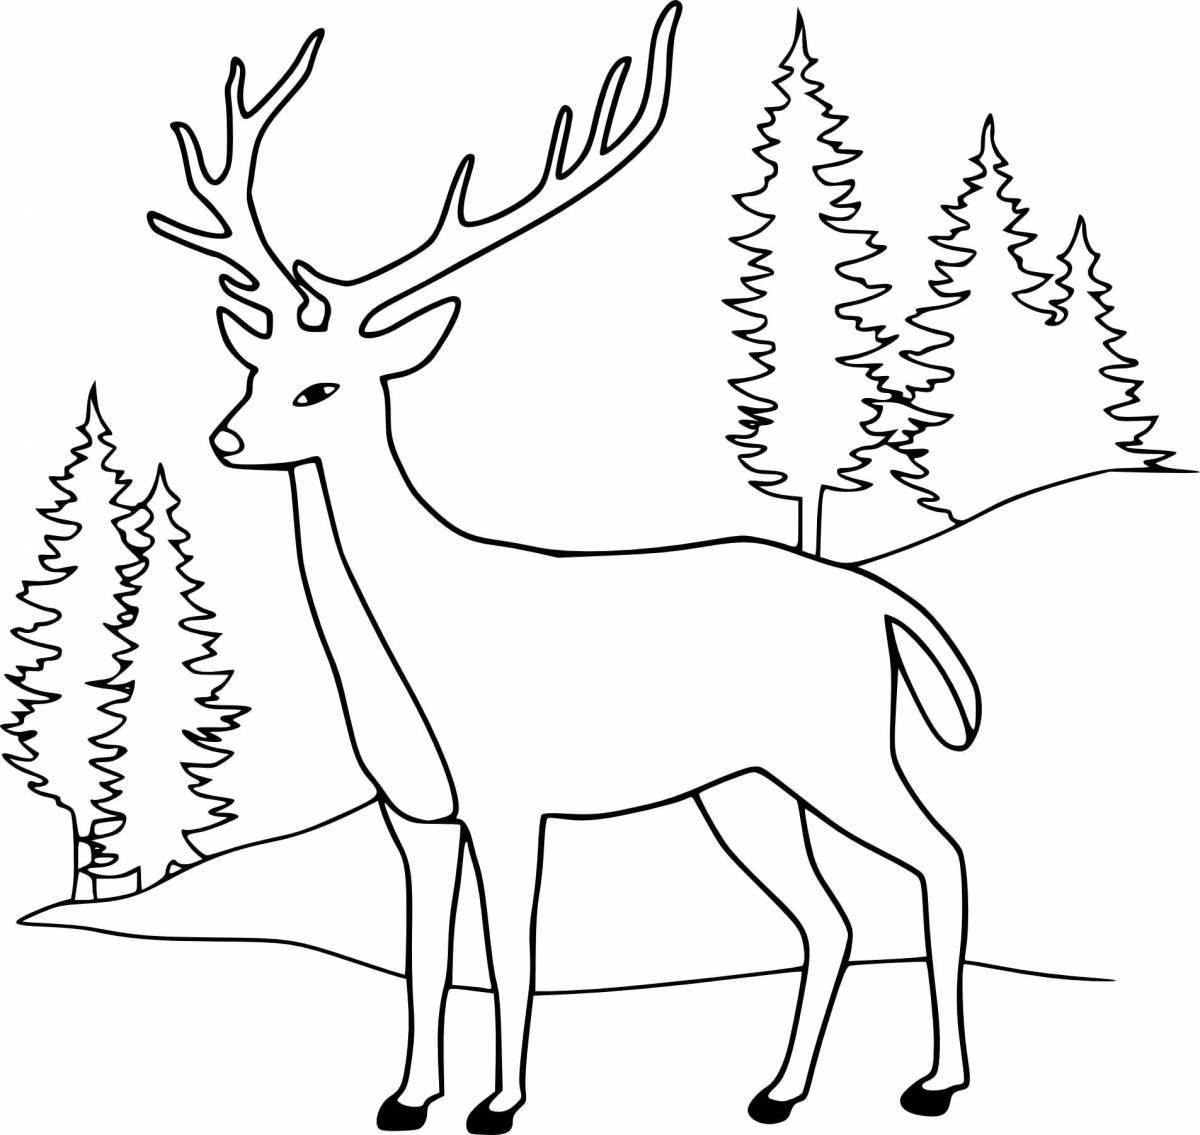 Colouring friendly reindeer